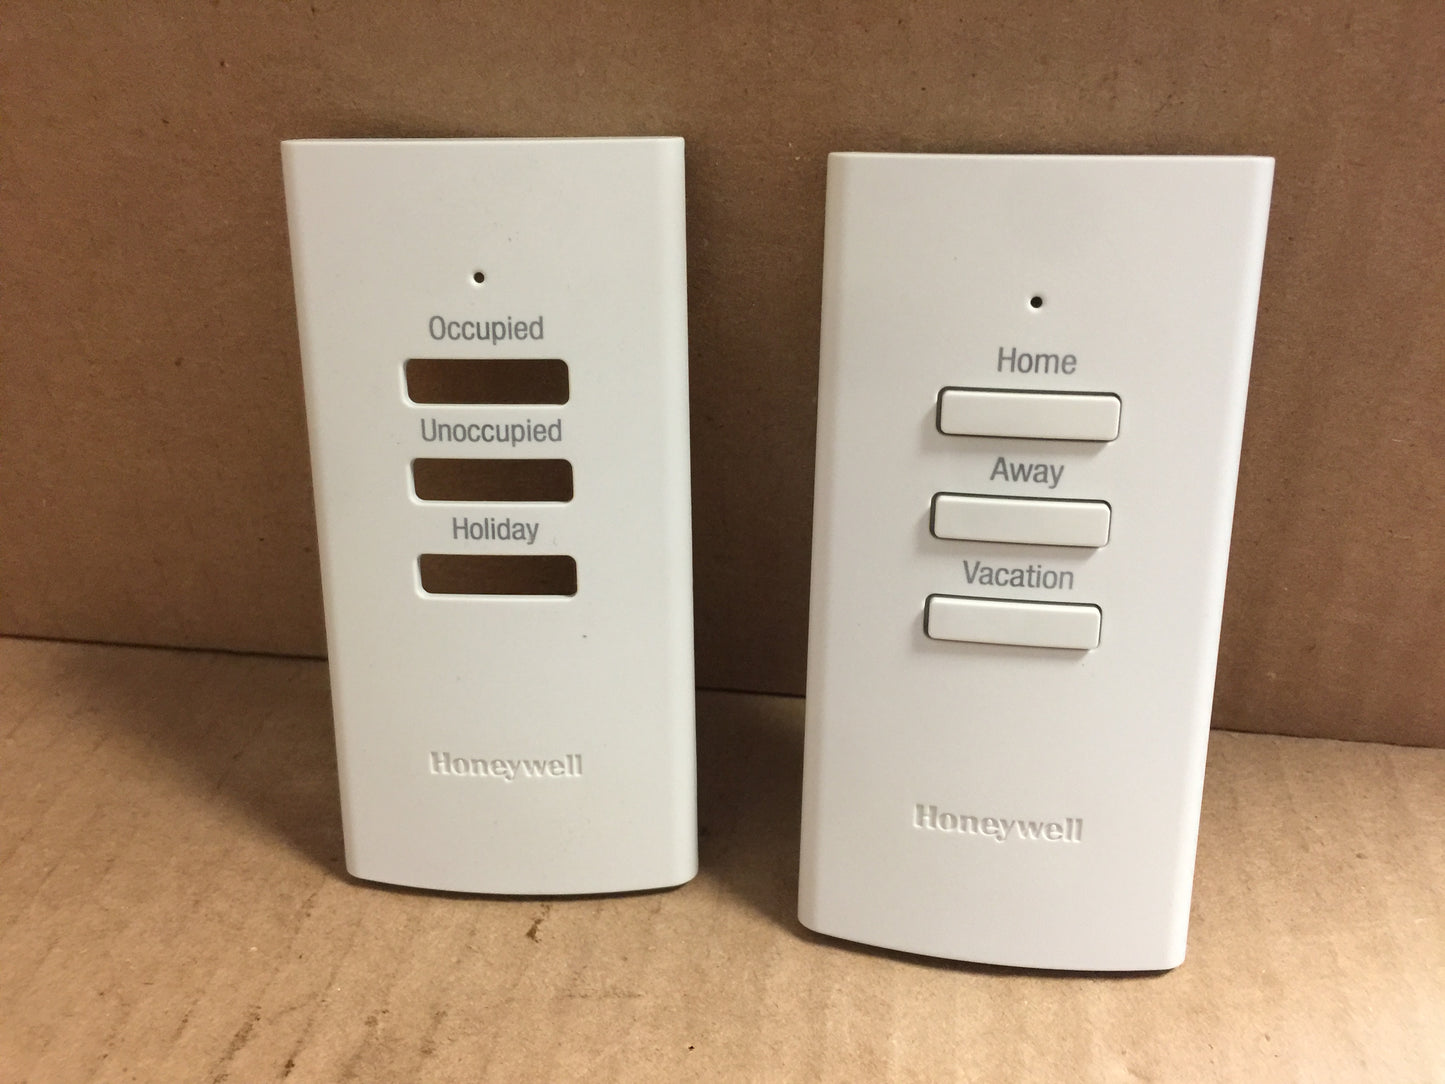 WIRELESS ENTRY/EXIT REMOTE FOR HONEYWELL REDLINK ENABLED SYSTEMS